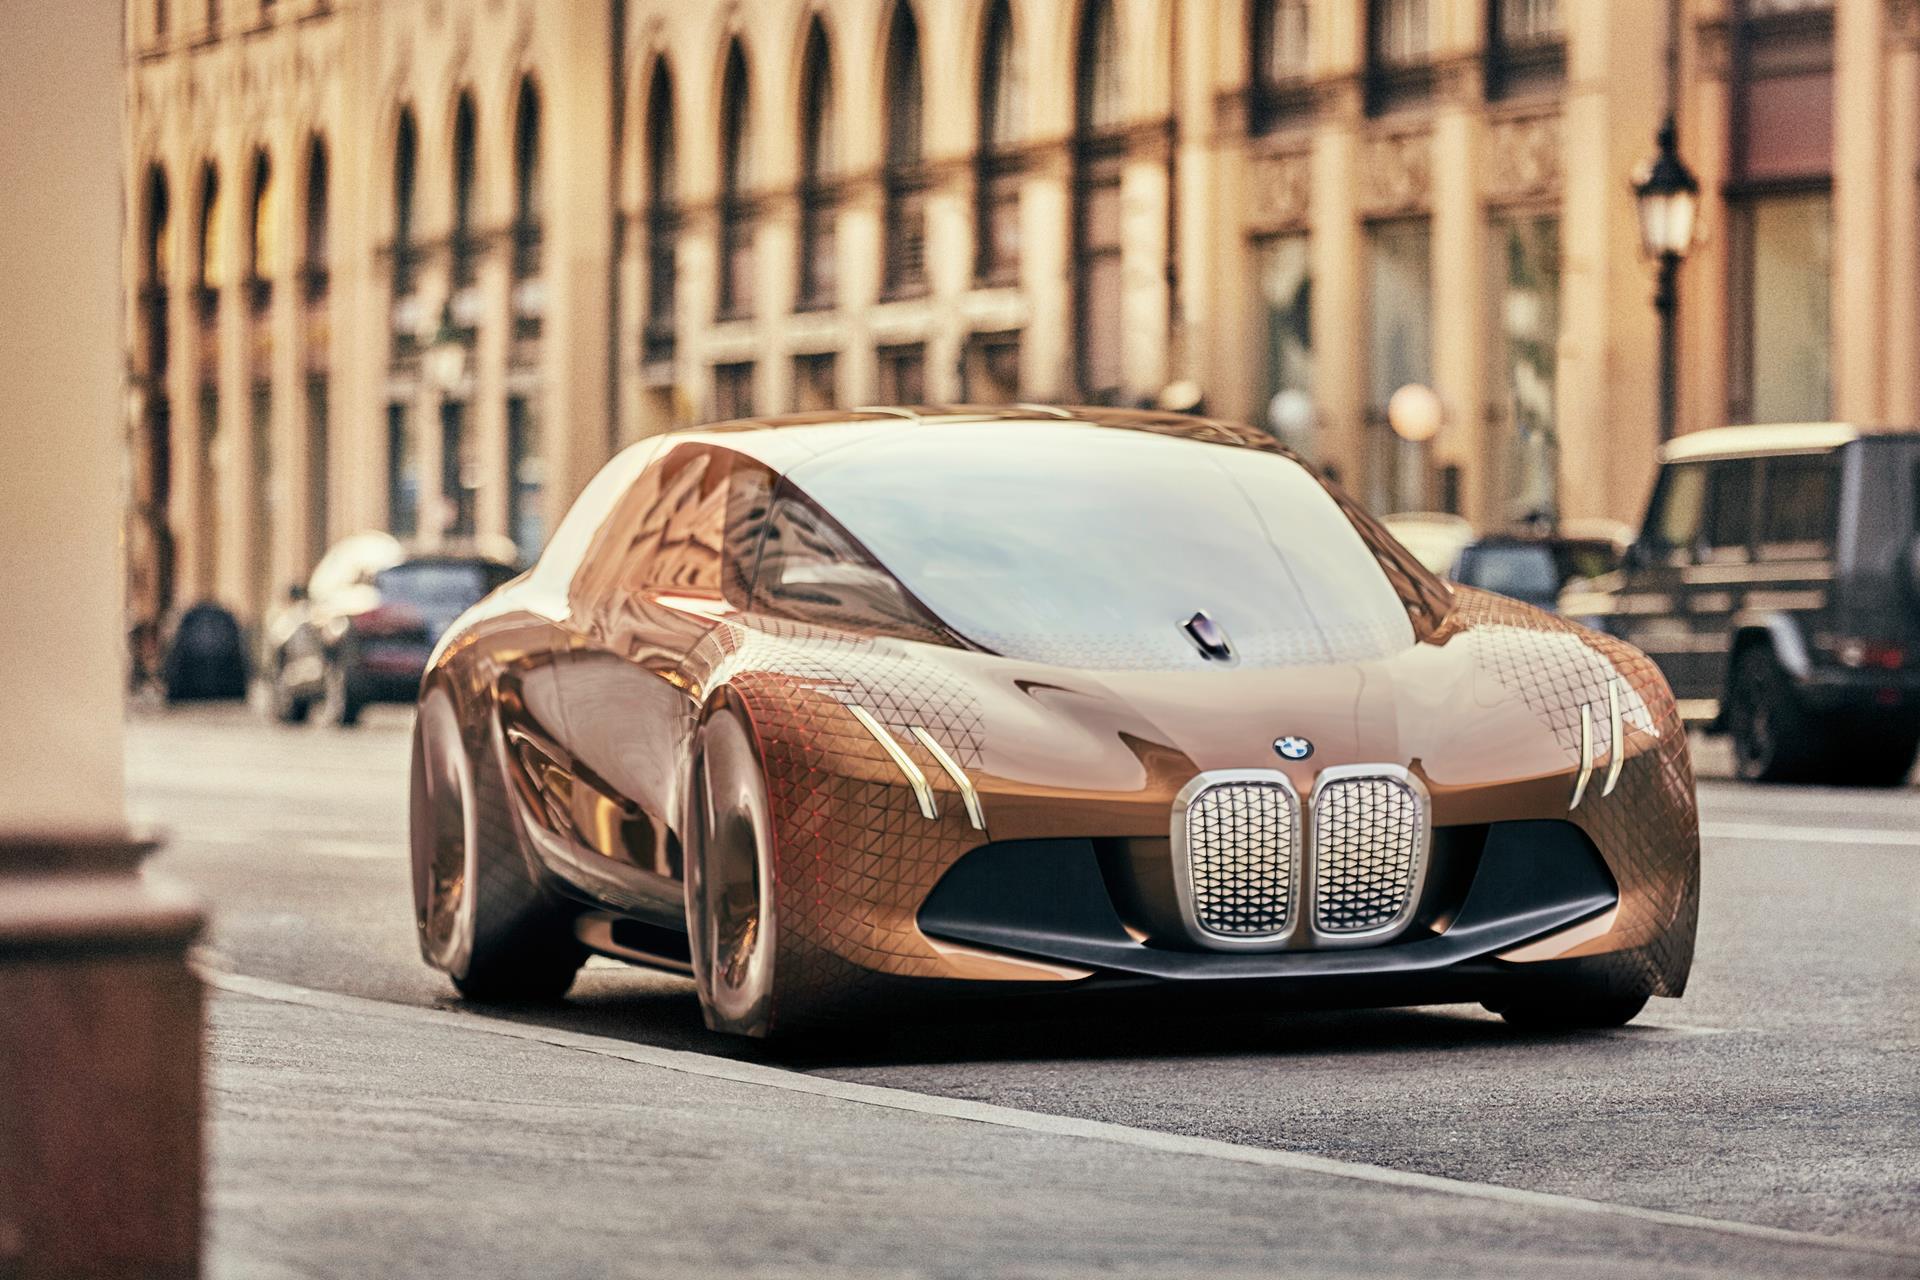 2016 Bmw Vision Next 100 News And Information Research And Pricing